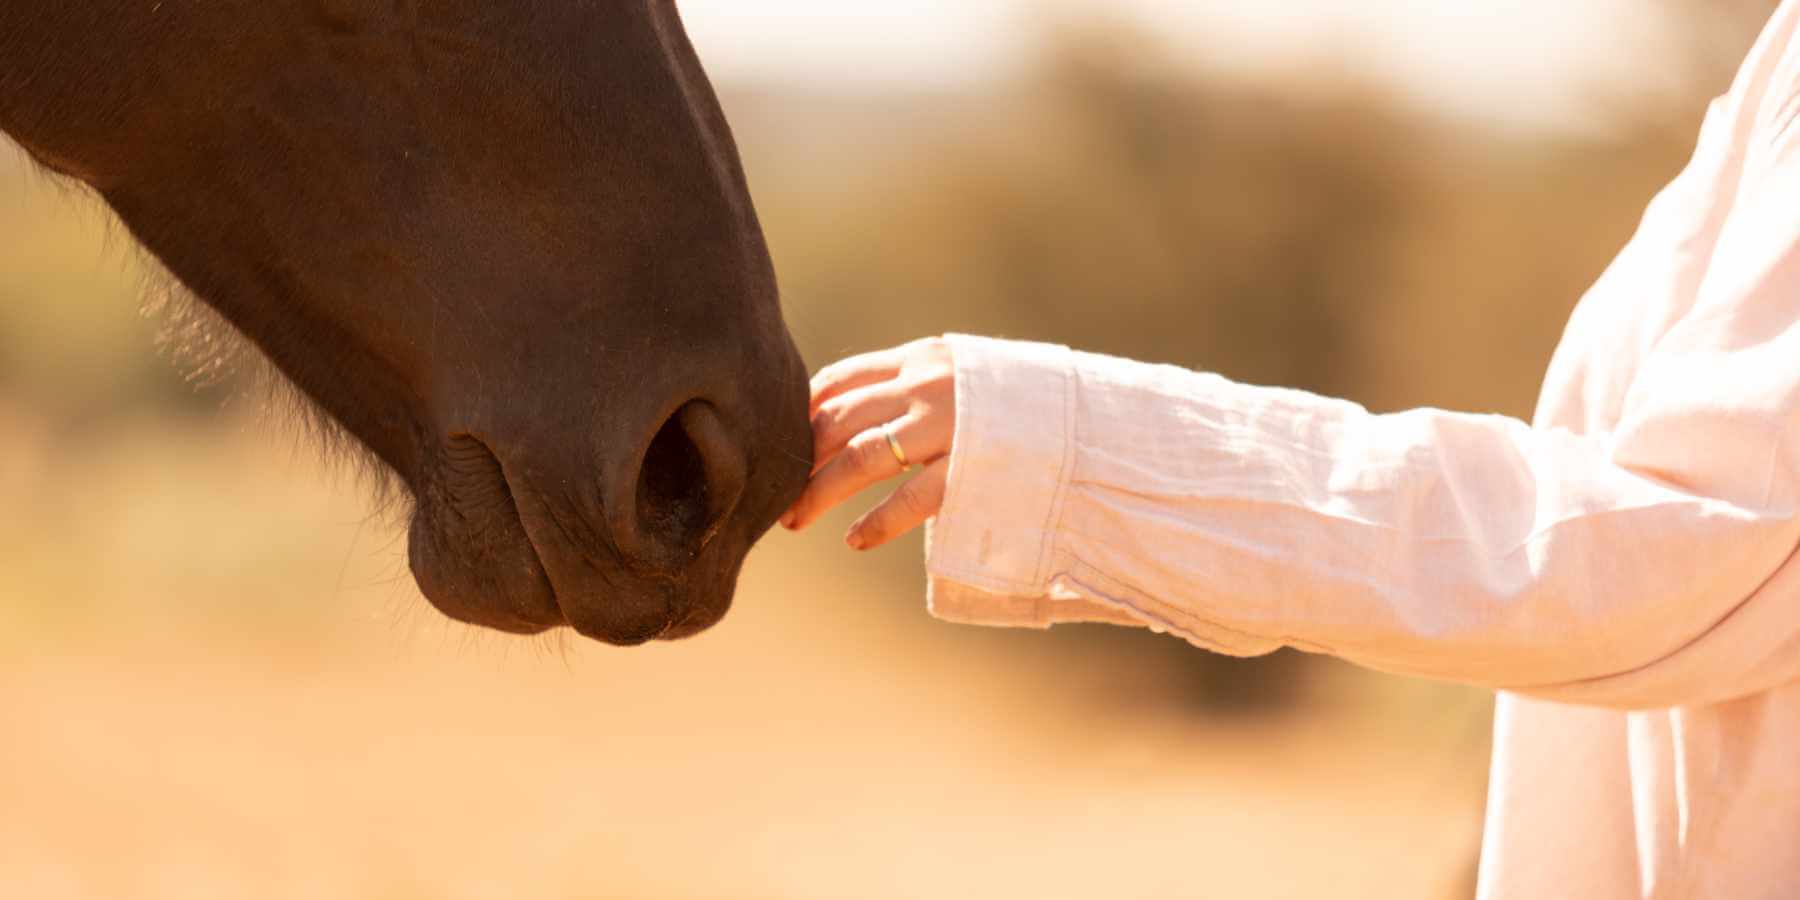 A horse smelling the hand of a volunteer is a tender moment between the two species.